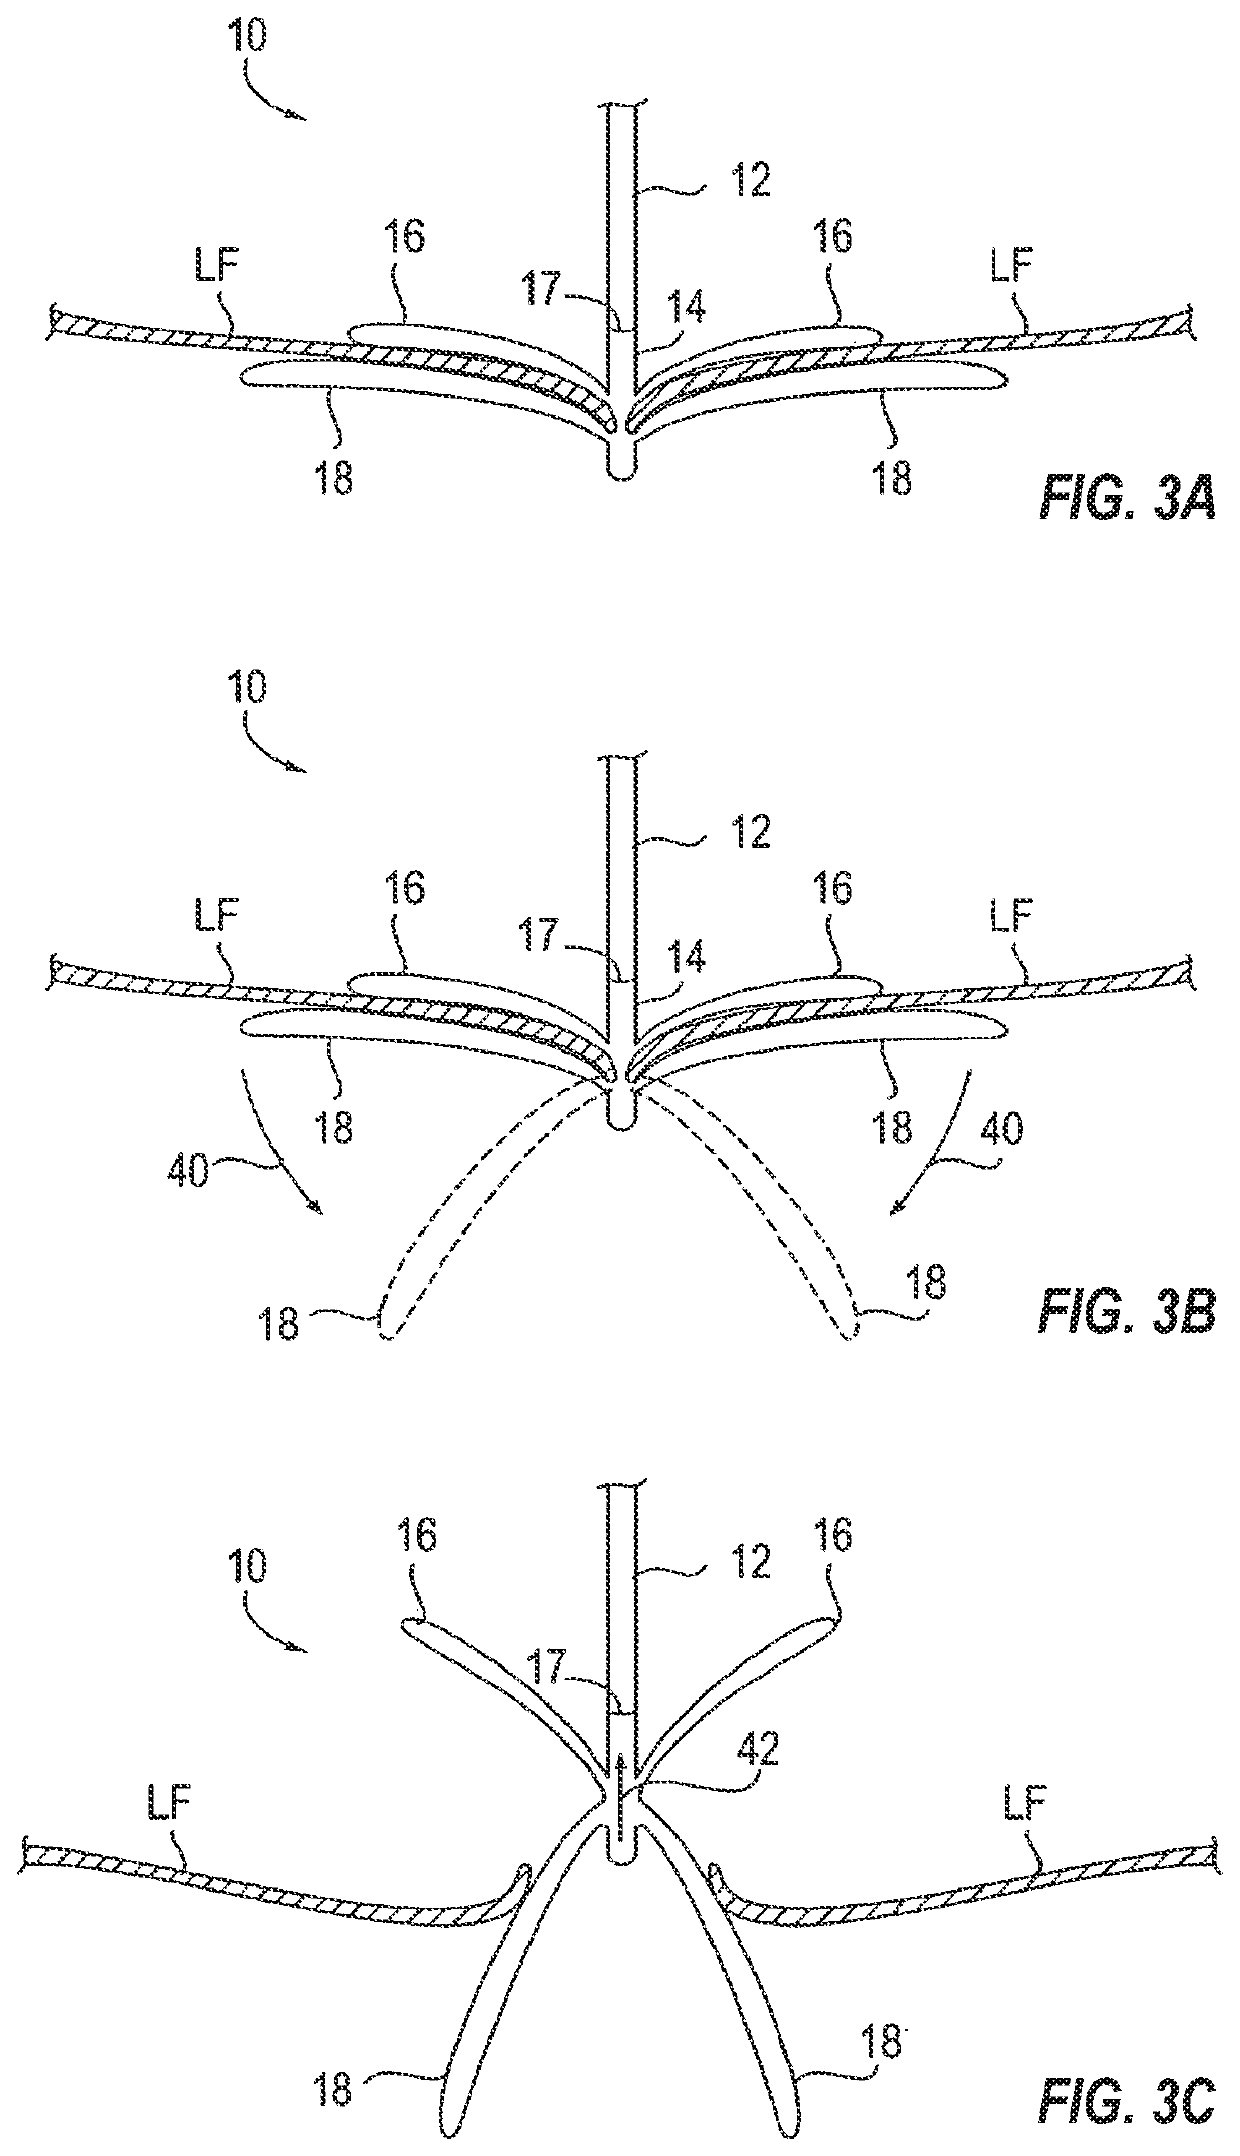 Tissue cutting systems, devices and methods